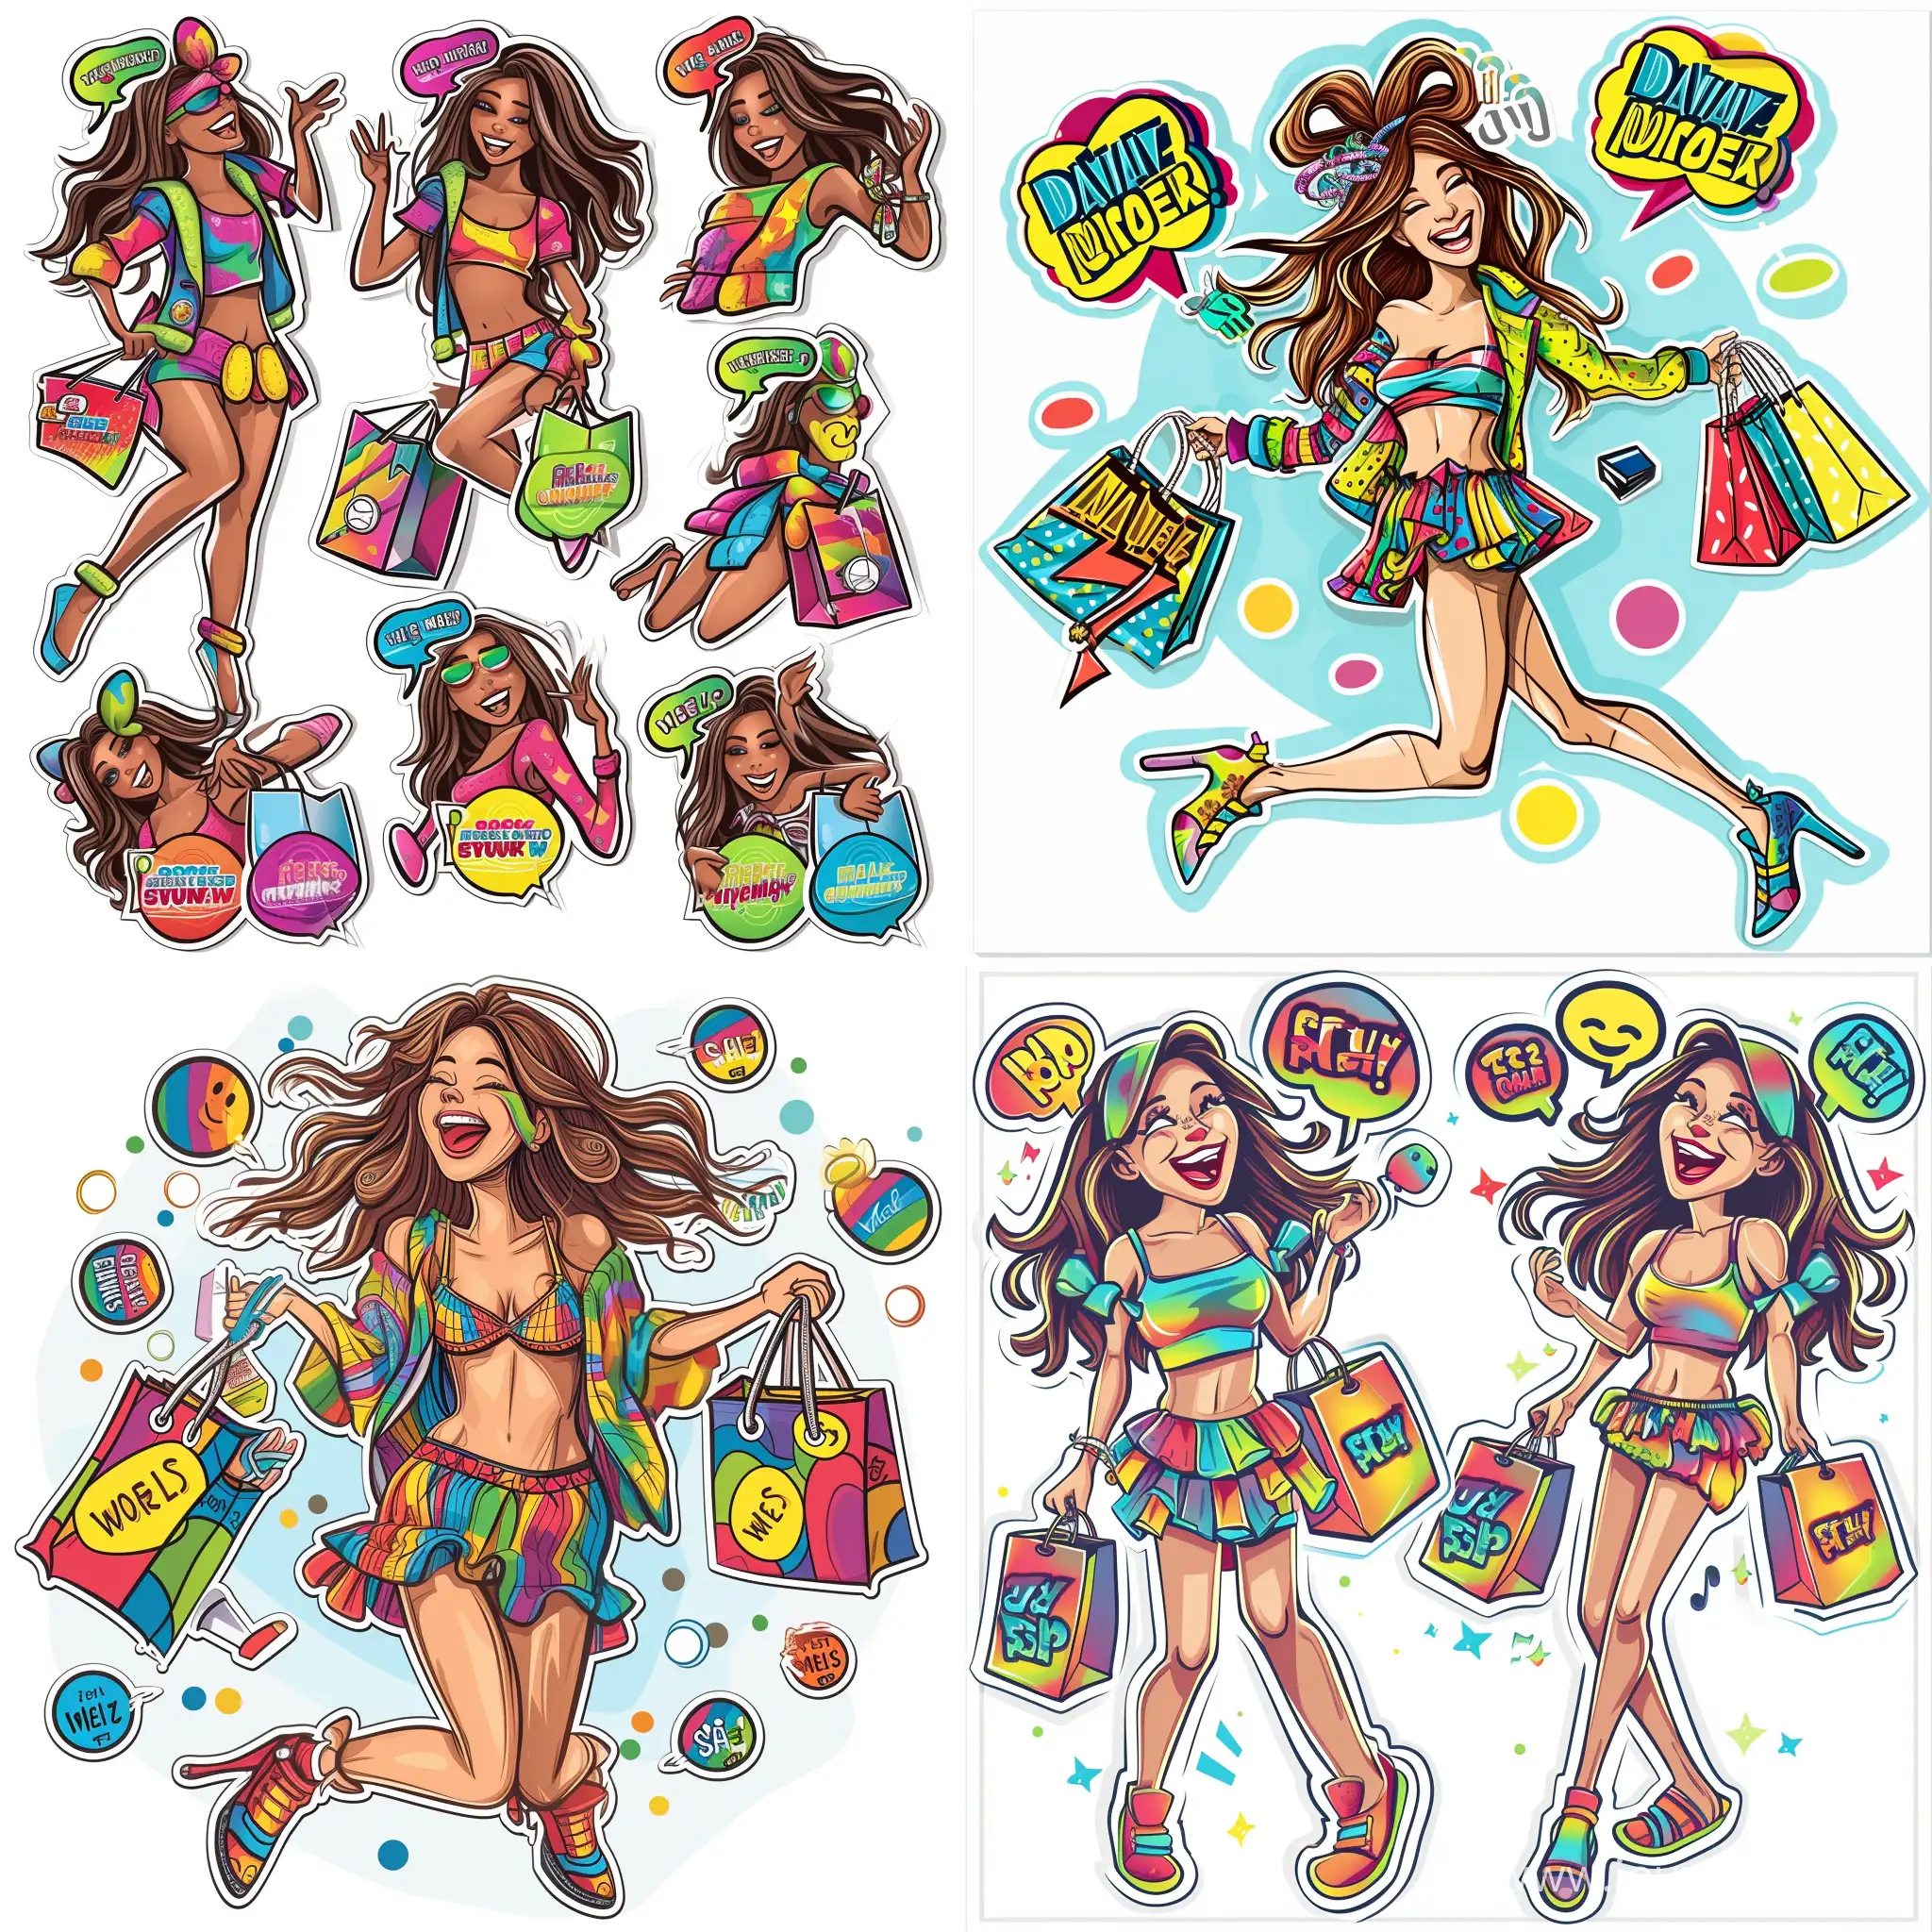 set stickers emoji featuring, pixar style, brunette woman, 30 years old, with a sweet smile, wearing stylish colorful clothes and accessories, dancing joyfully while holding shopping bags with sales tags, word bubbles around her head like in comics, word bubbles around her head like in comics, with vibrant colors and white borders on a minimal background